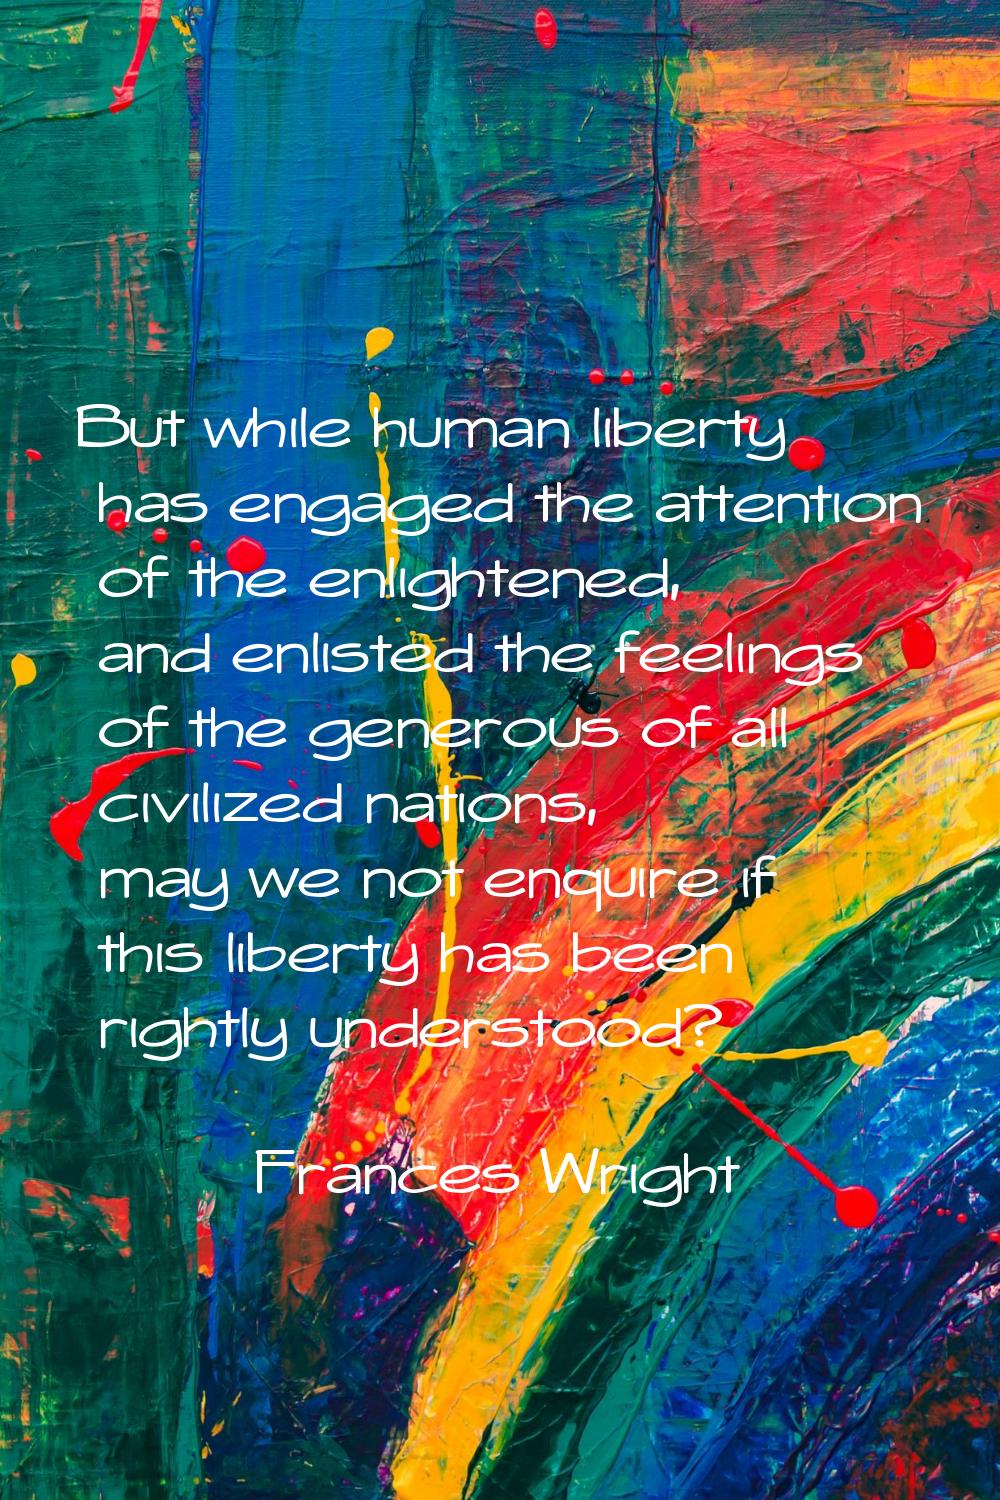 But while human liberty has engaged the attention of the enlightened, and enlisted the feelings of 